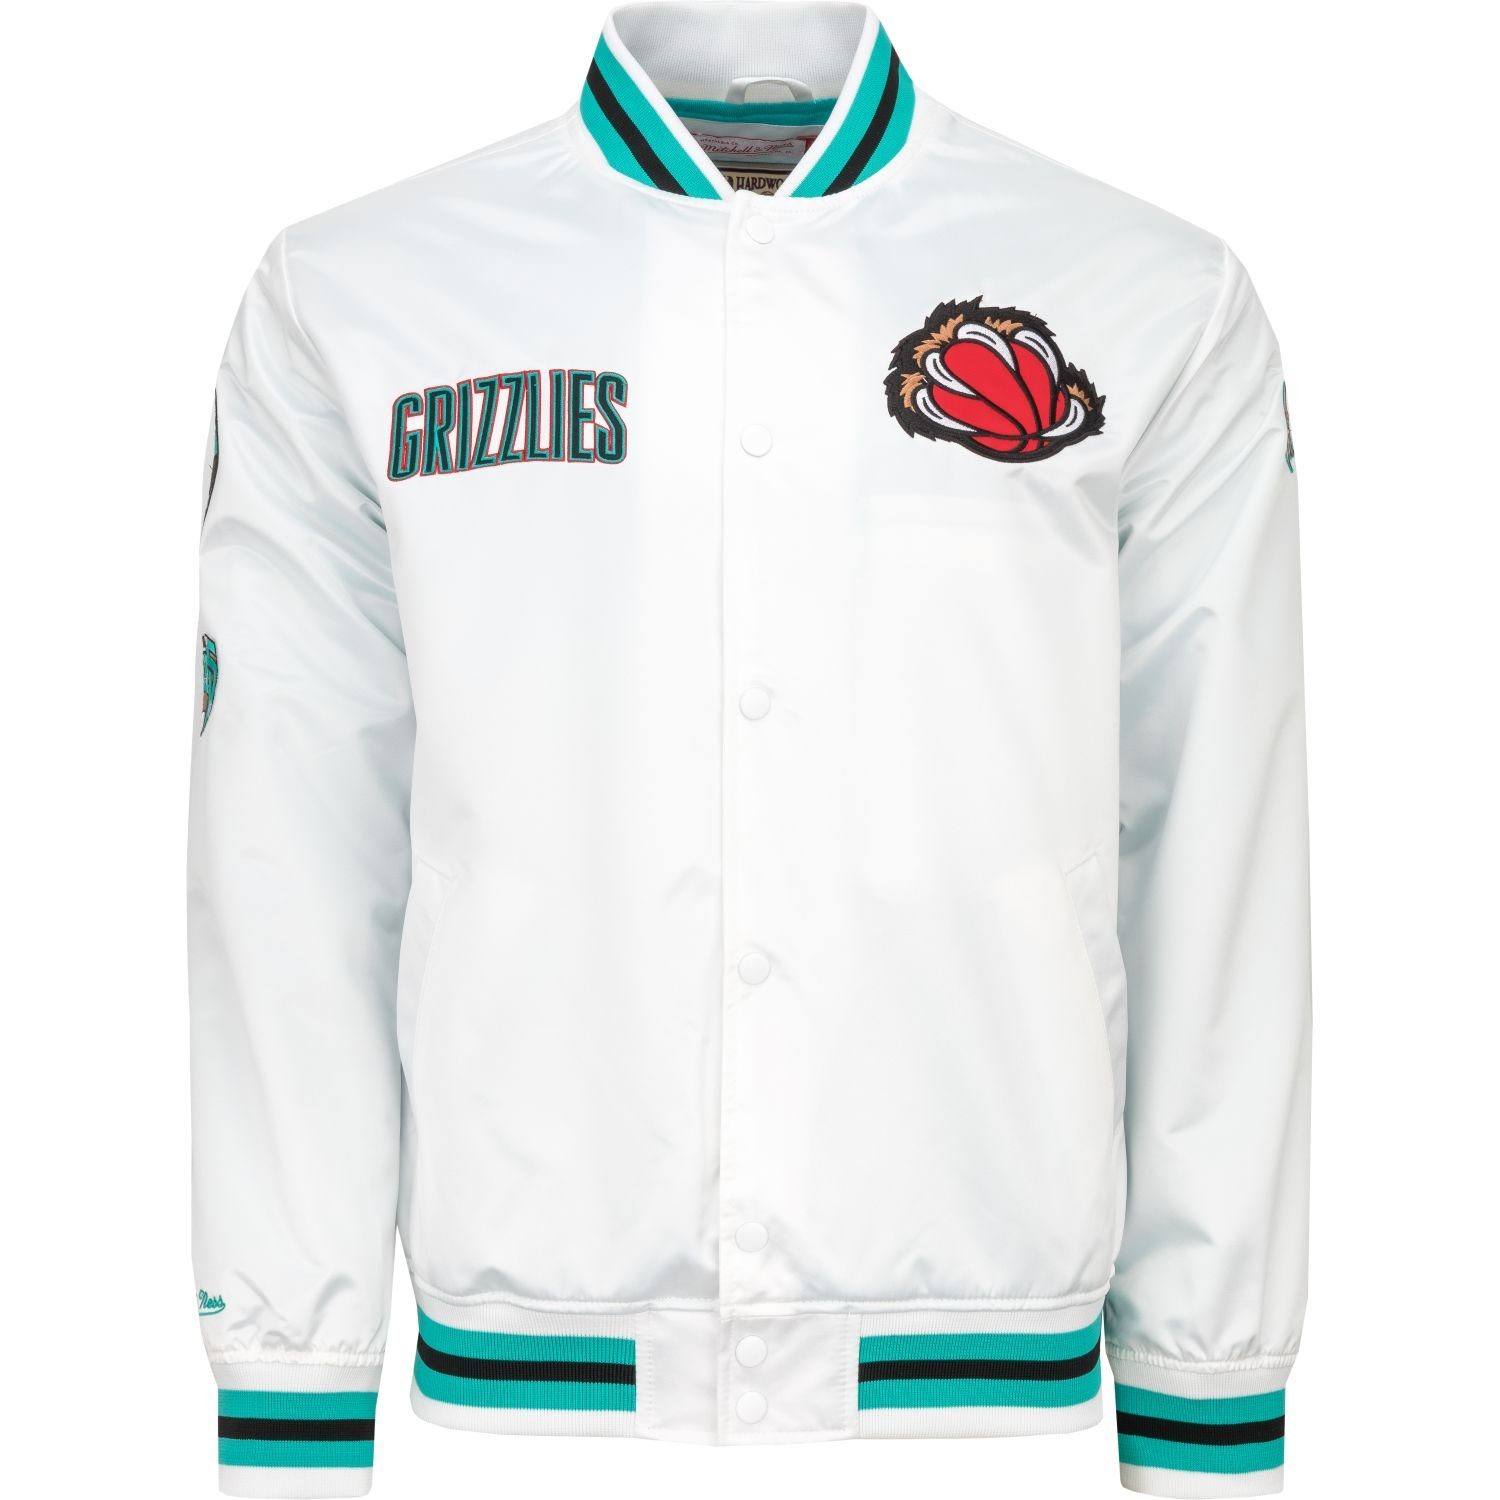 Satin & Collection Ness Mitchell Grizzlies Collegejacke Vancouver City